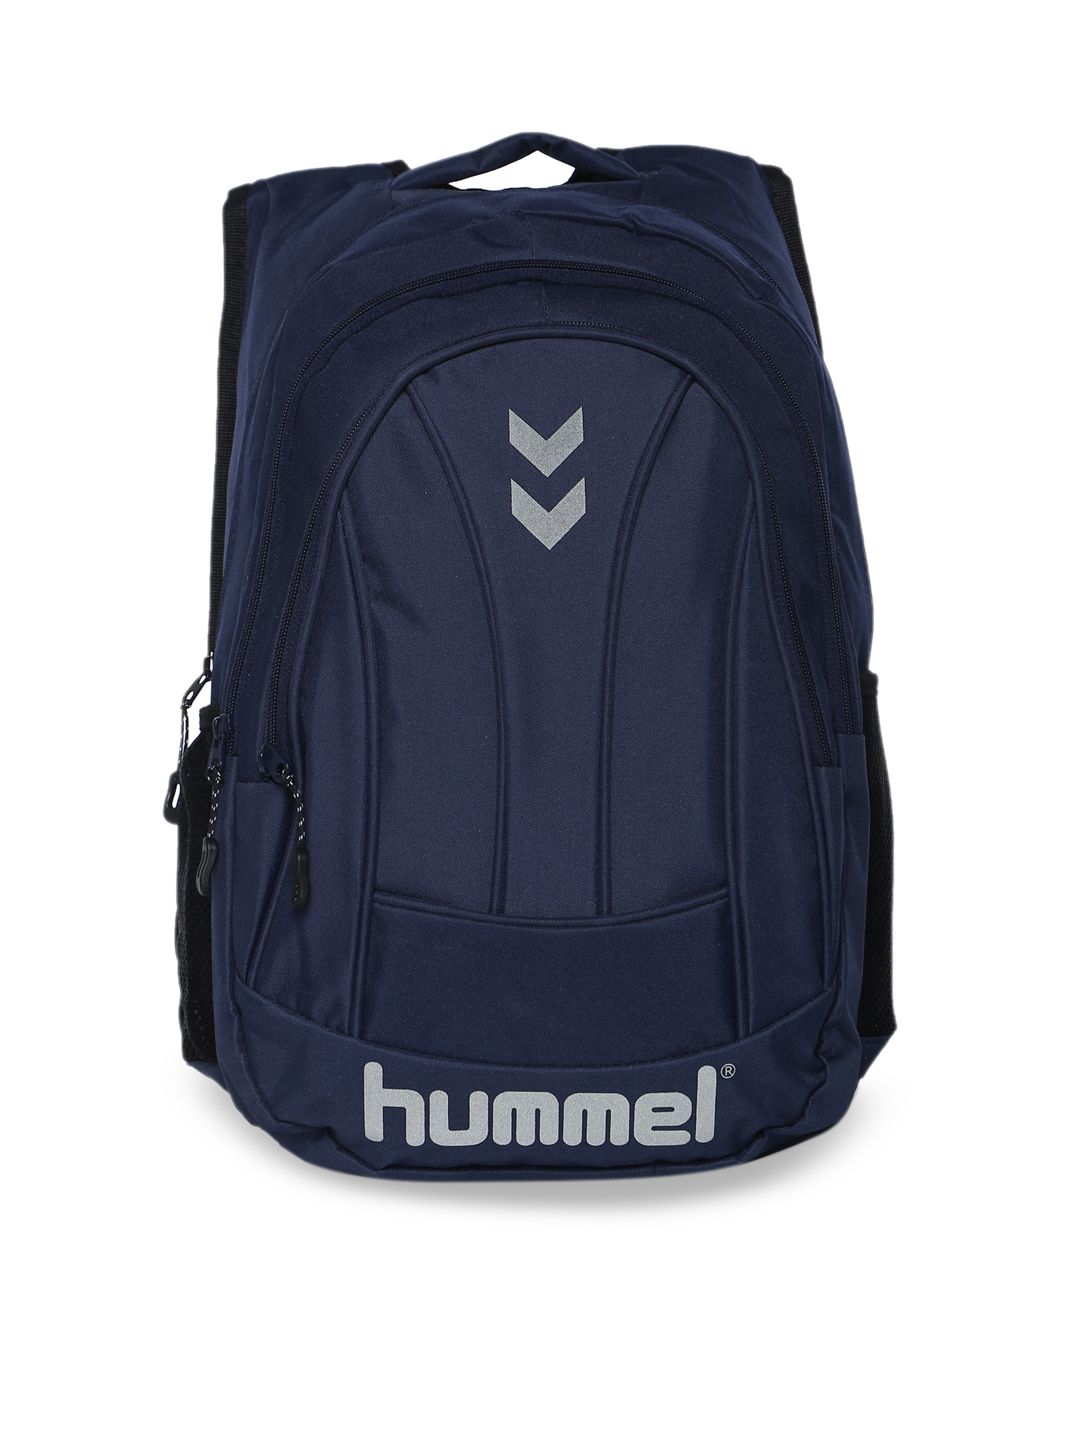 hummel Unisex Blue Solid Backpack Price in India